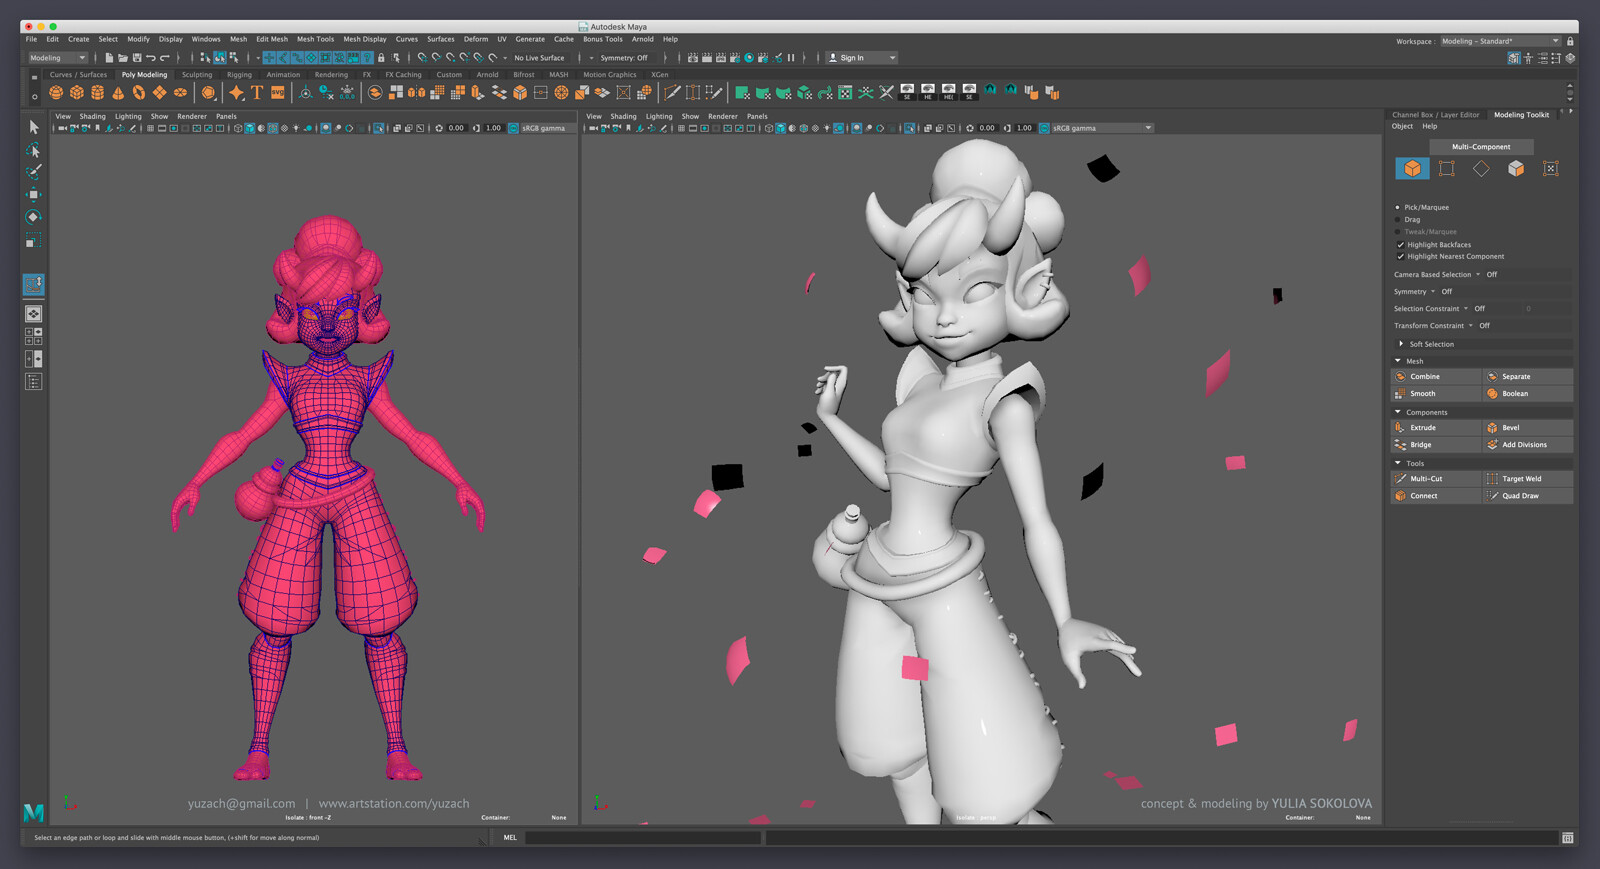 Low-poly in Maya, rigged for posing